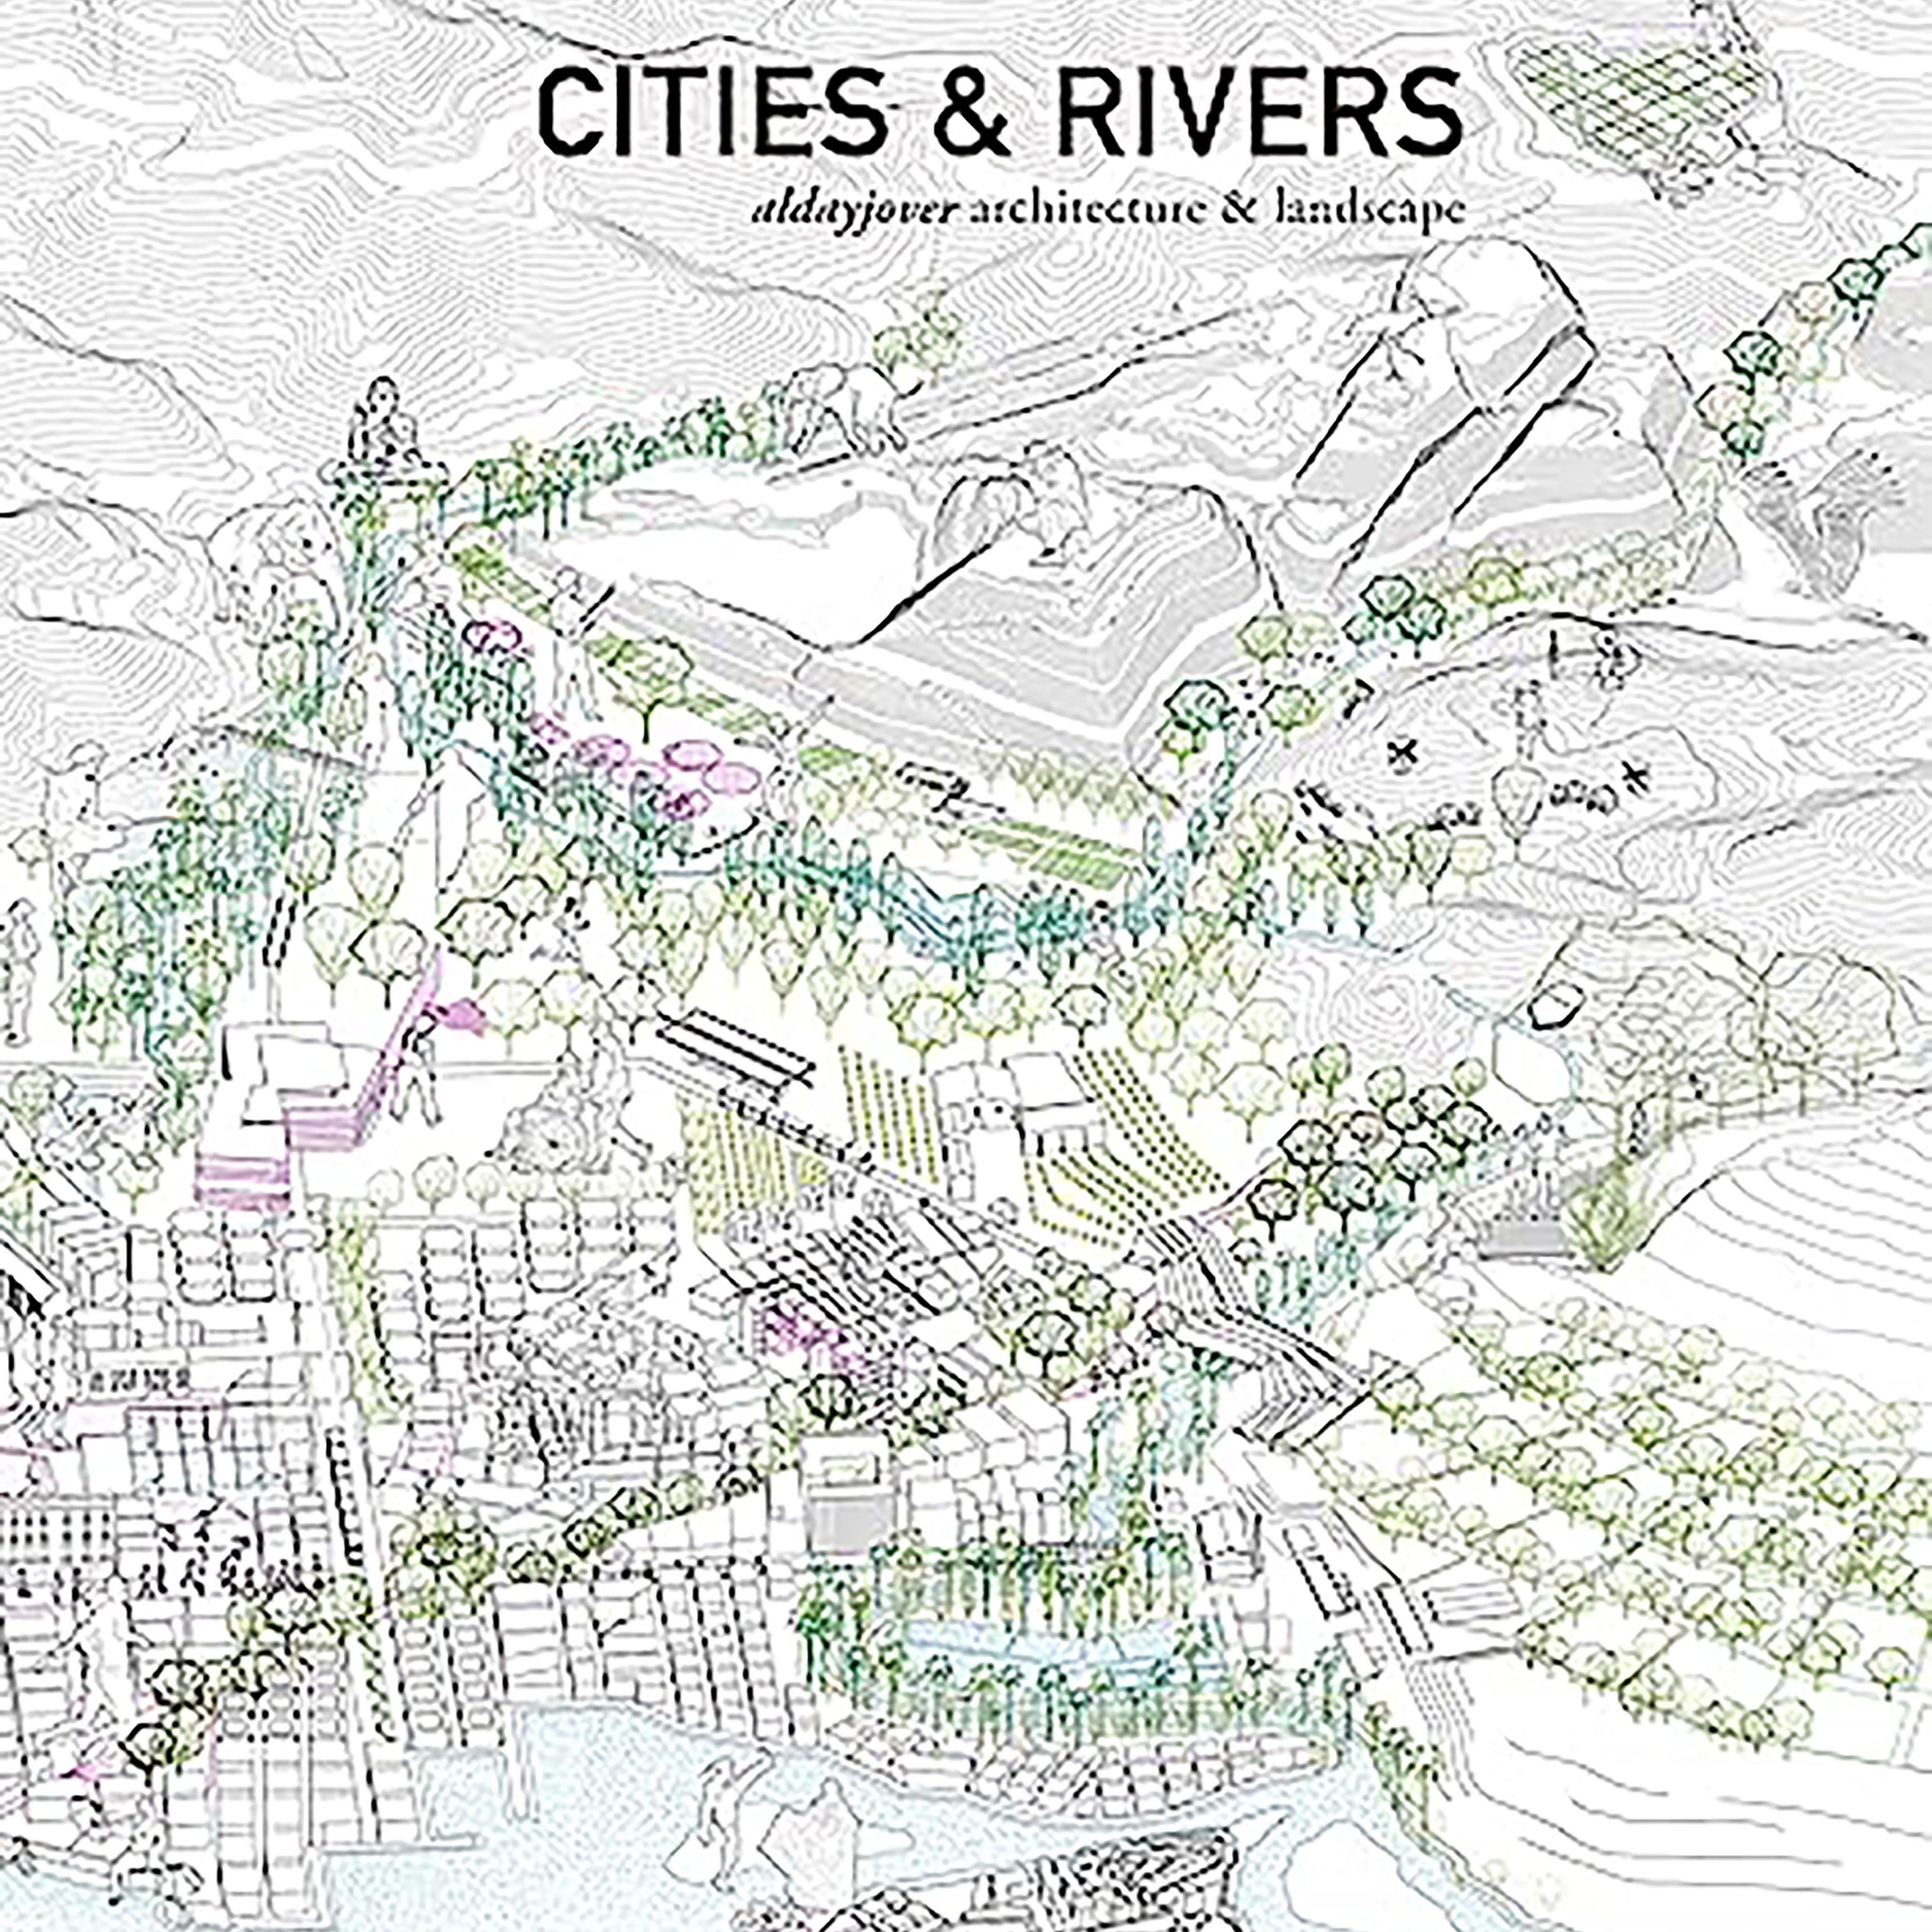 Cover of Cities and Rivers book